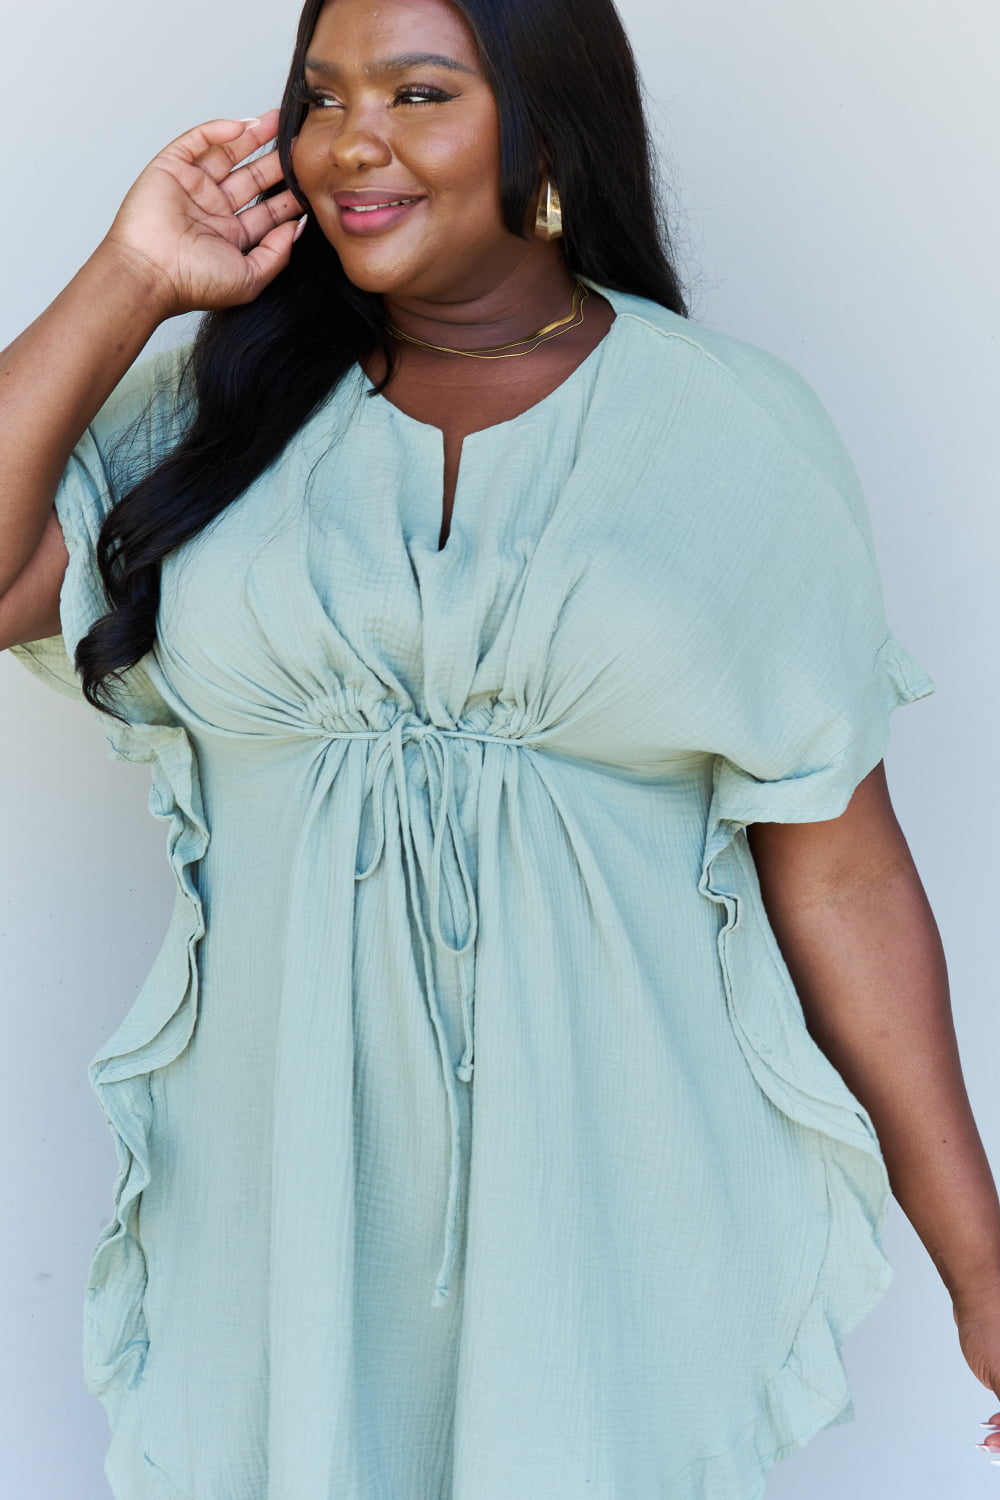 Ninexis Out Of Time Full Size Ruffle Hem Dress with Drawstring Waistband in Light Sage - Tigbul's Fashion